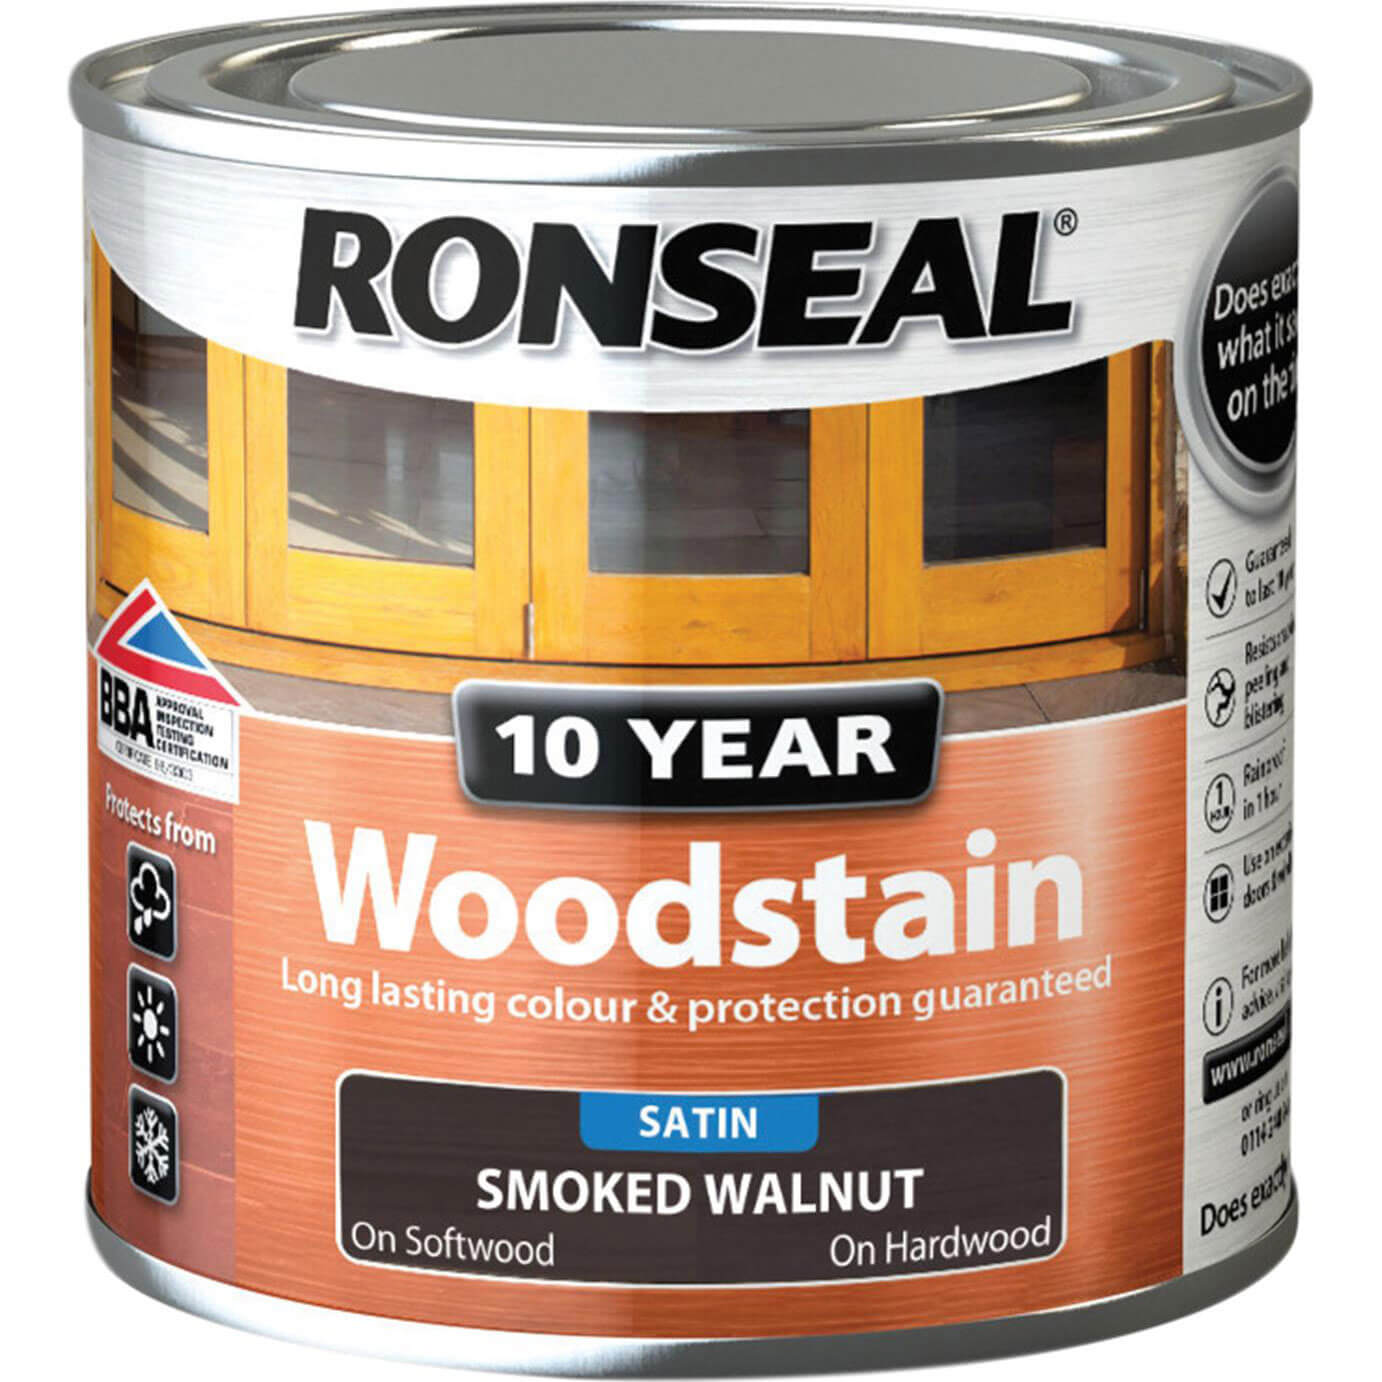 Image of Ronseal 10 Year Wood Stain Smoked Walnut 250ml